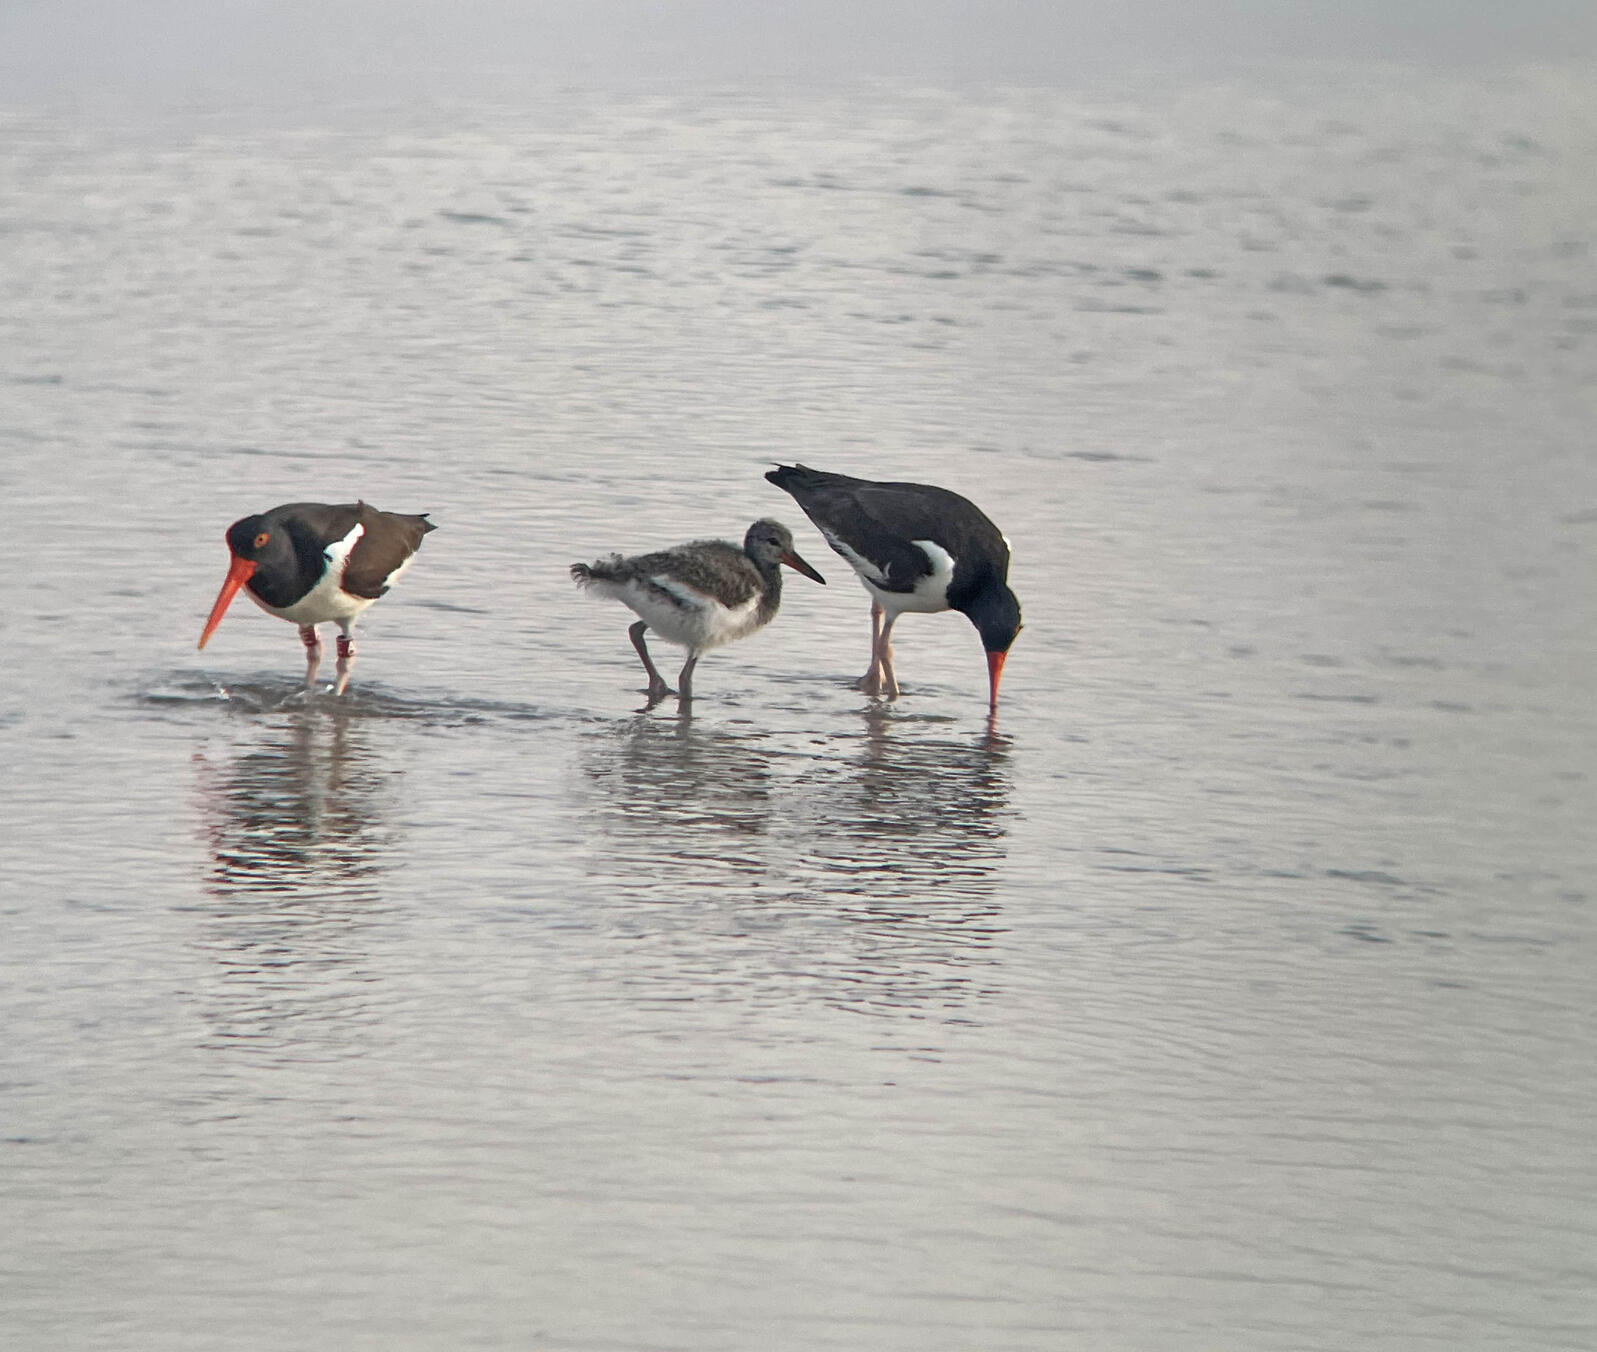 A family of American Oystercatchers standing in shallow water